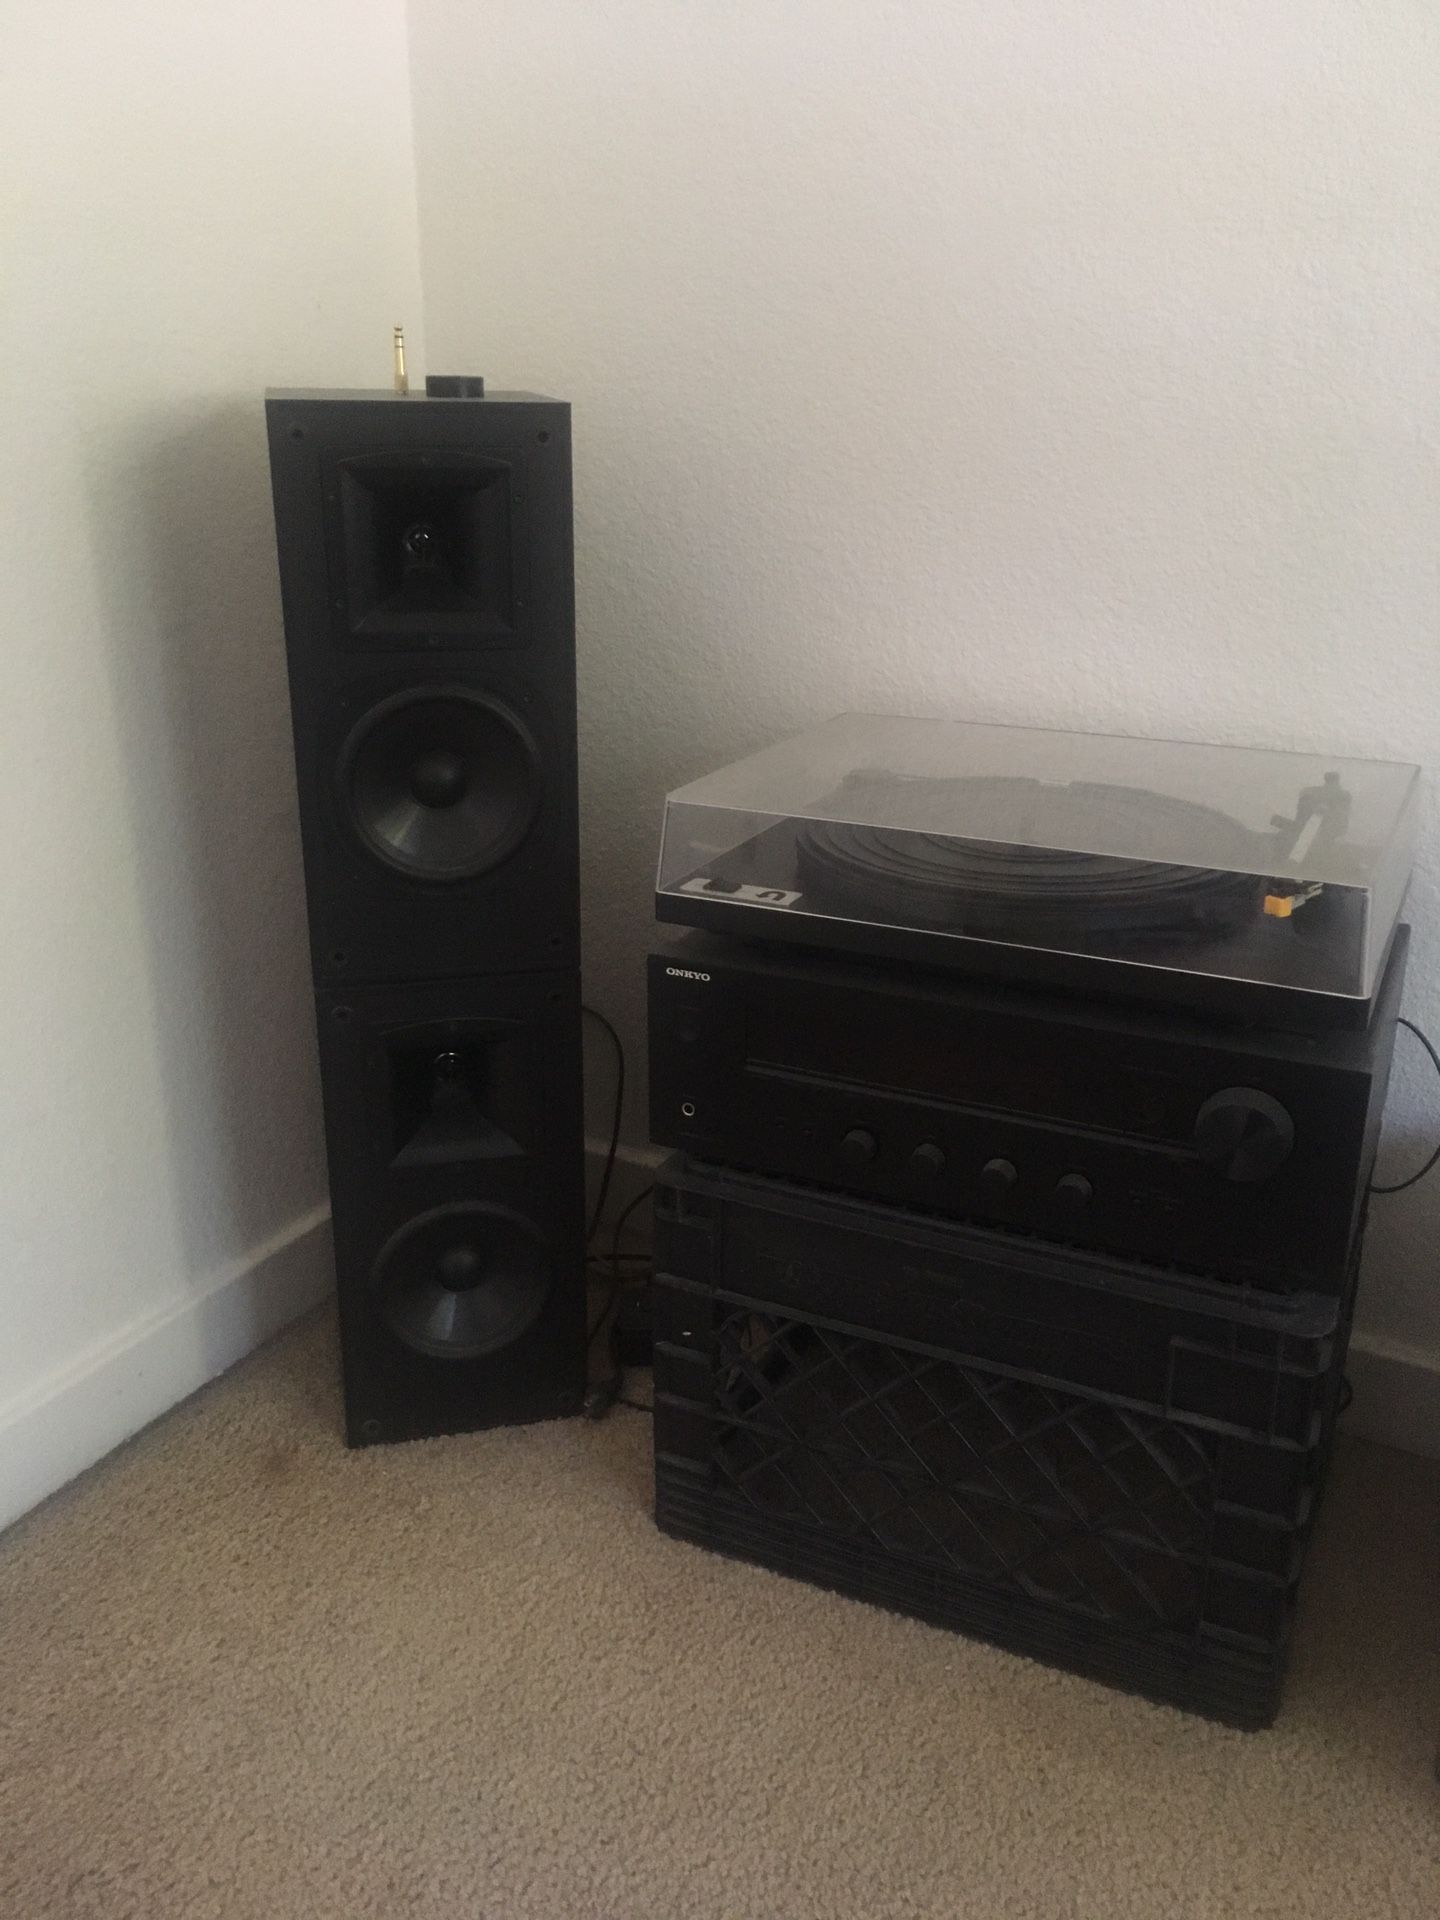 record player audio setup (turntable, receiver, speakers)